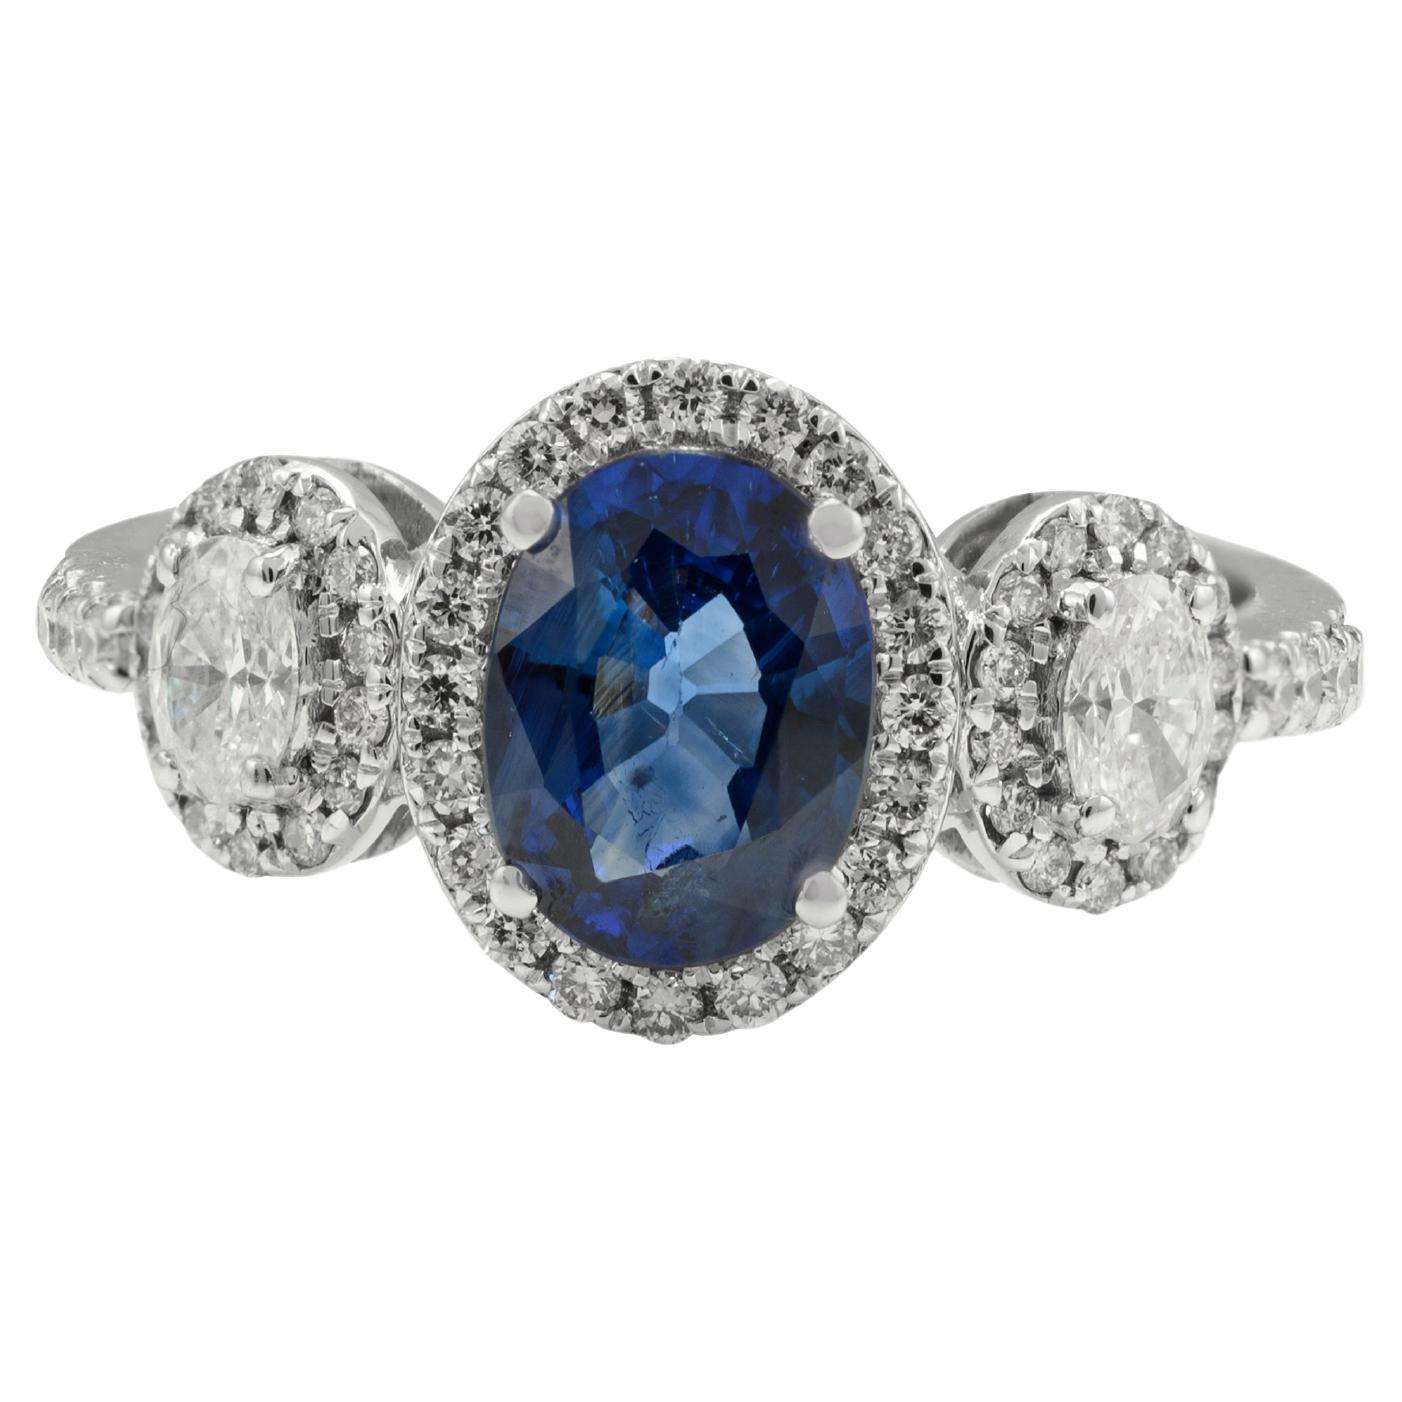 Certified Diamond and Blue Sapphire Three Stone Ring 18k Solid White Gold